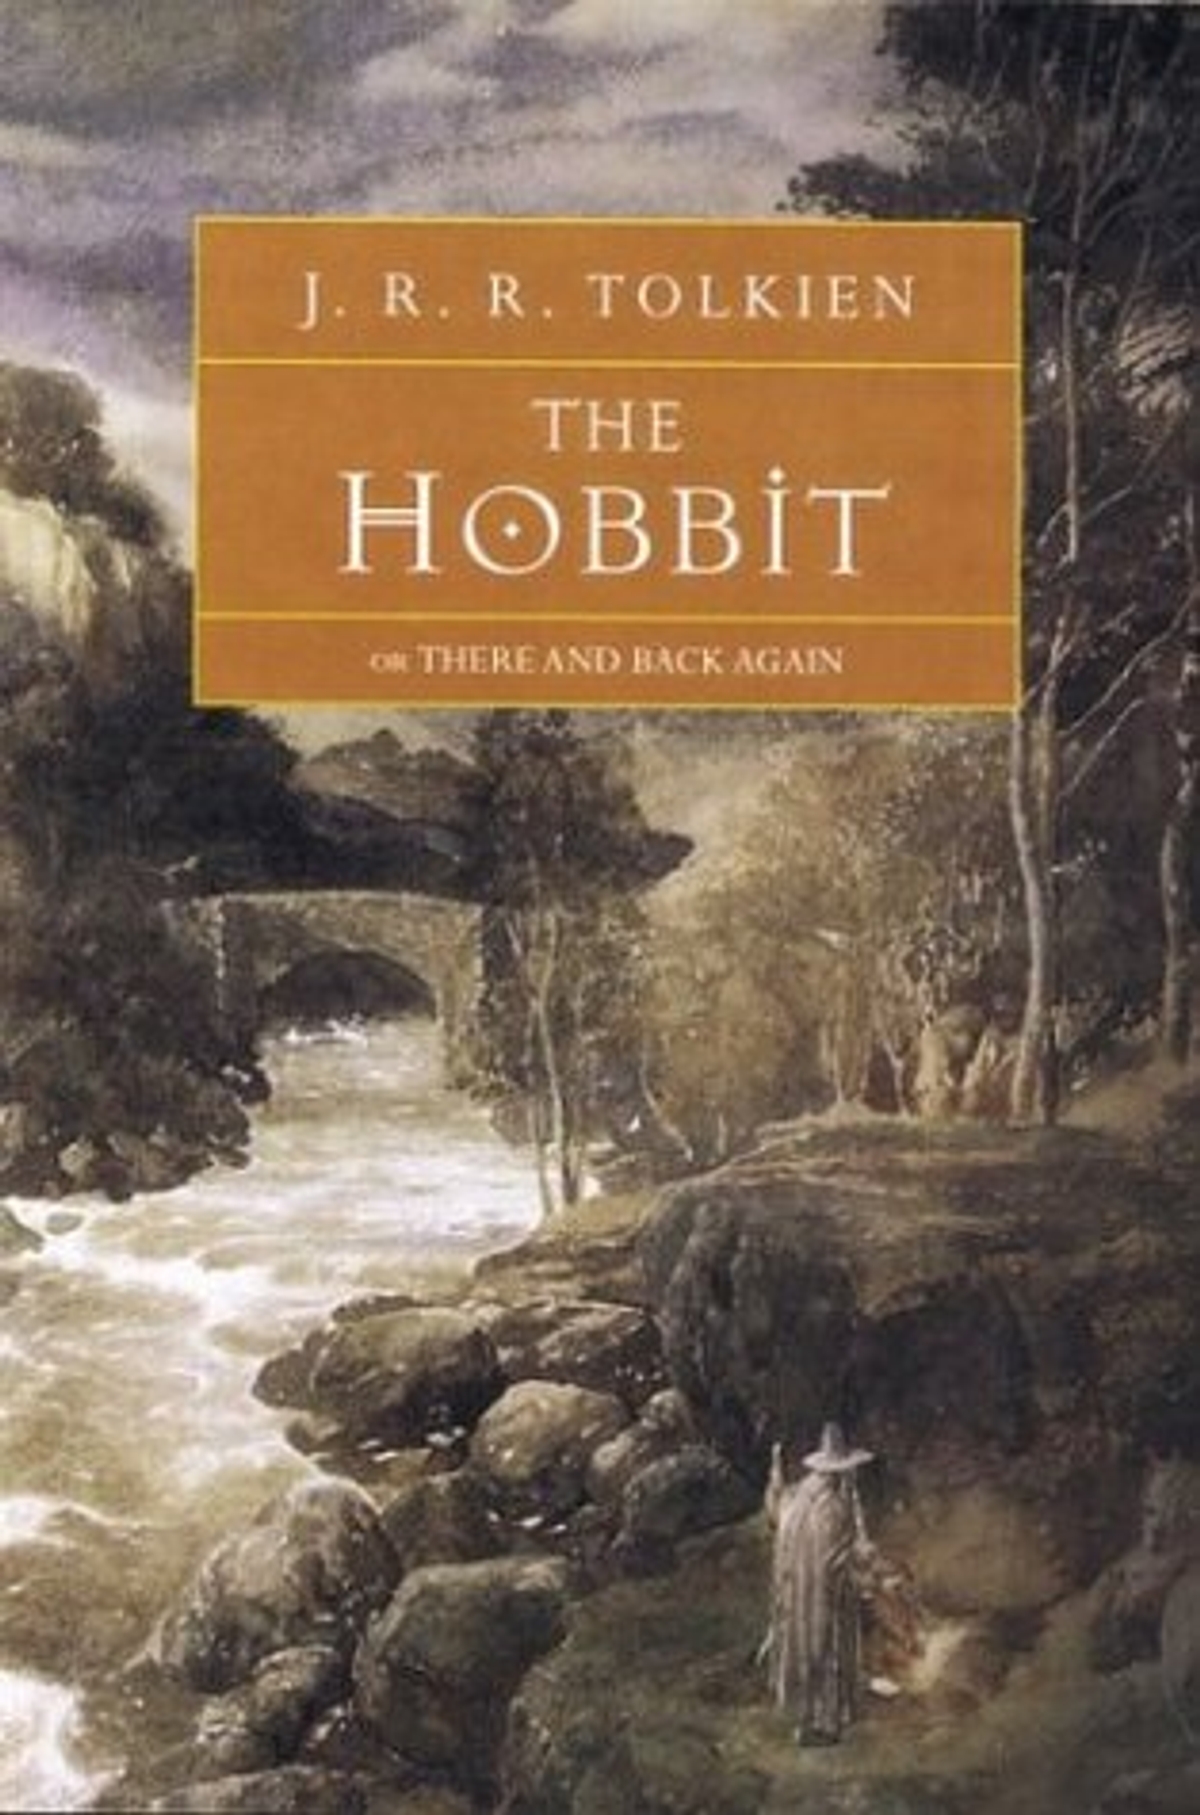 The Hobbit Book Covers 1999 Edition